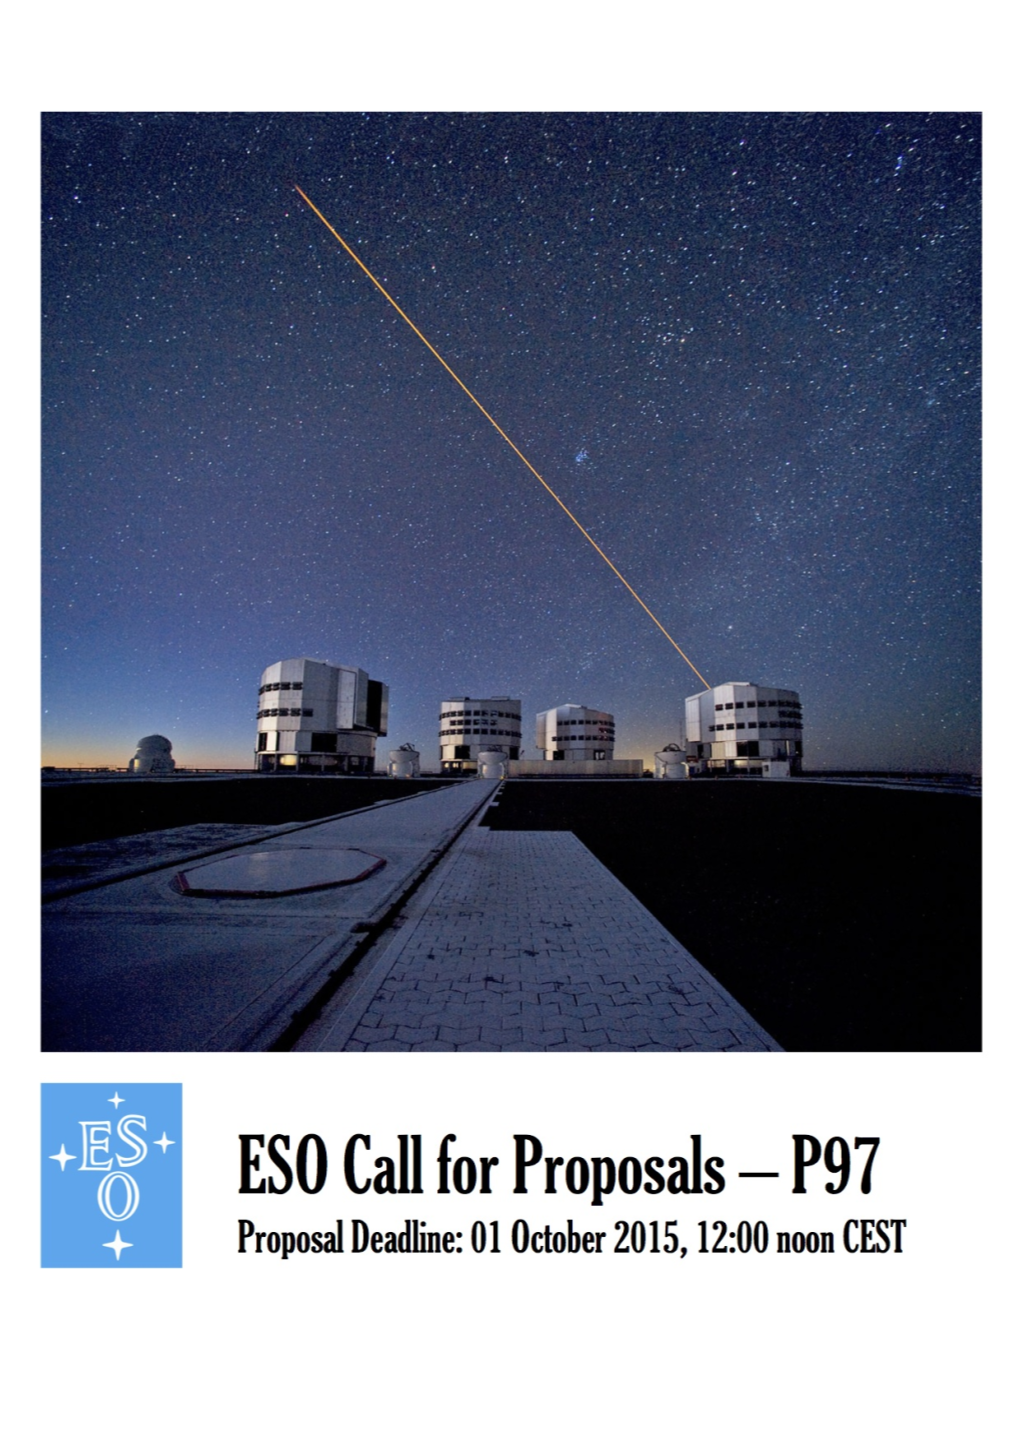 Call for Proposals for Period 97